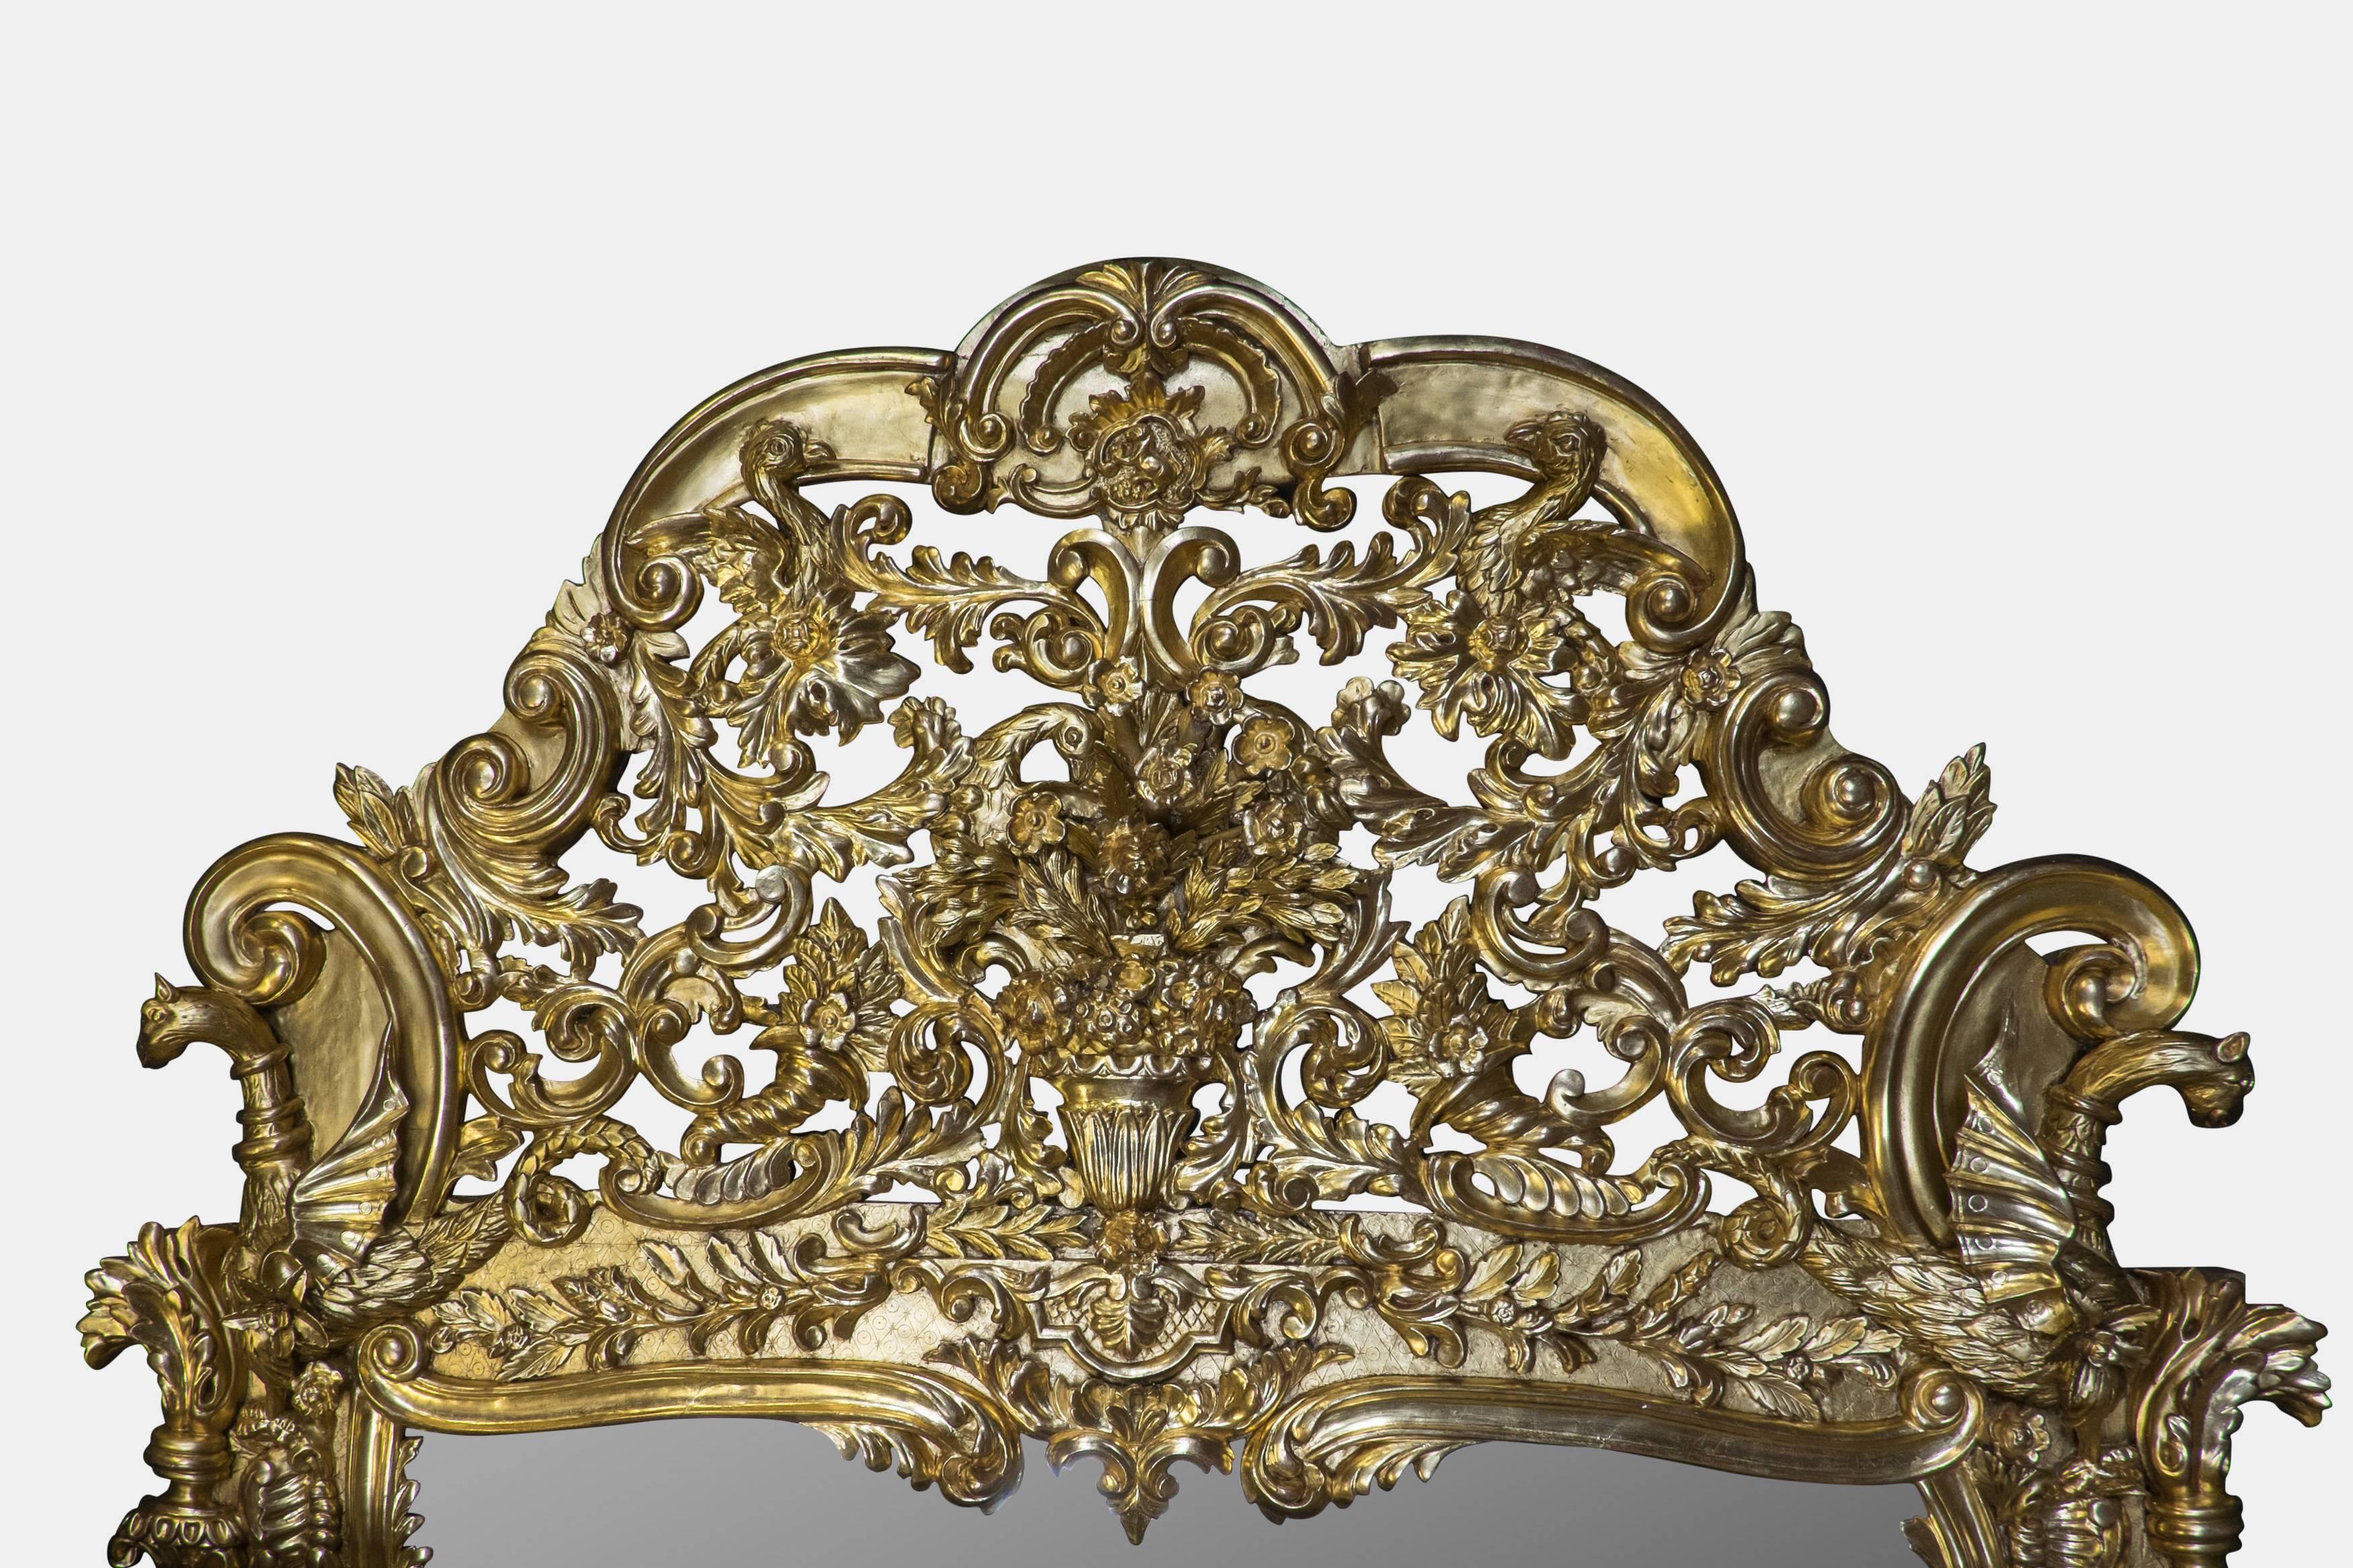 Pair of very large 19th century Italian Baroque mirrors with elaborate gilt frames, with good provenance. Recently regilded in 23.5-carat gold by master gilders